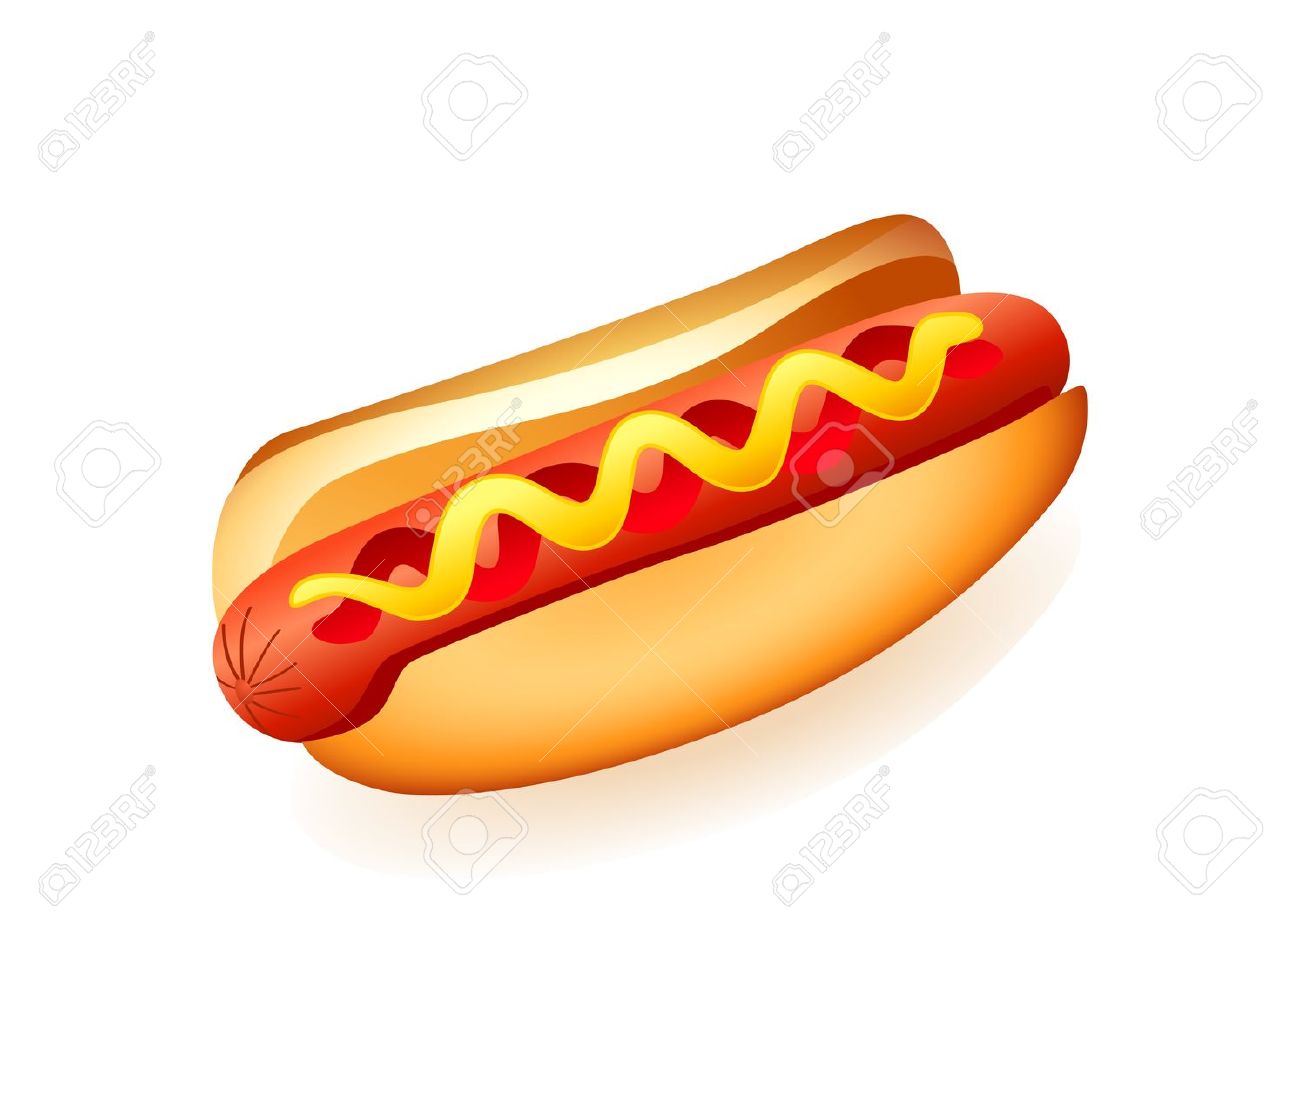 free clipart images of hot dogs - photo #47